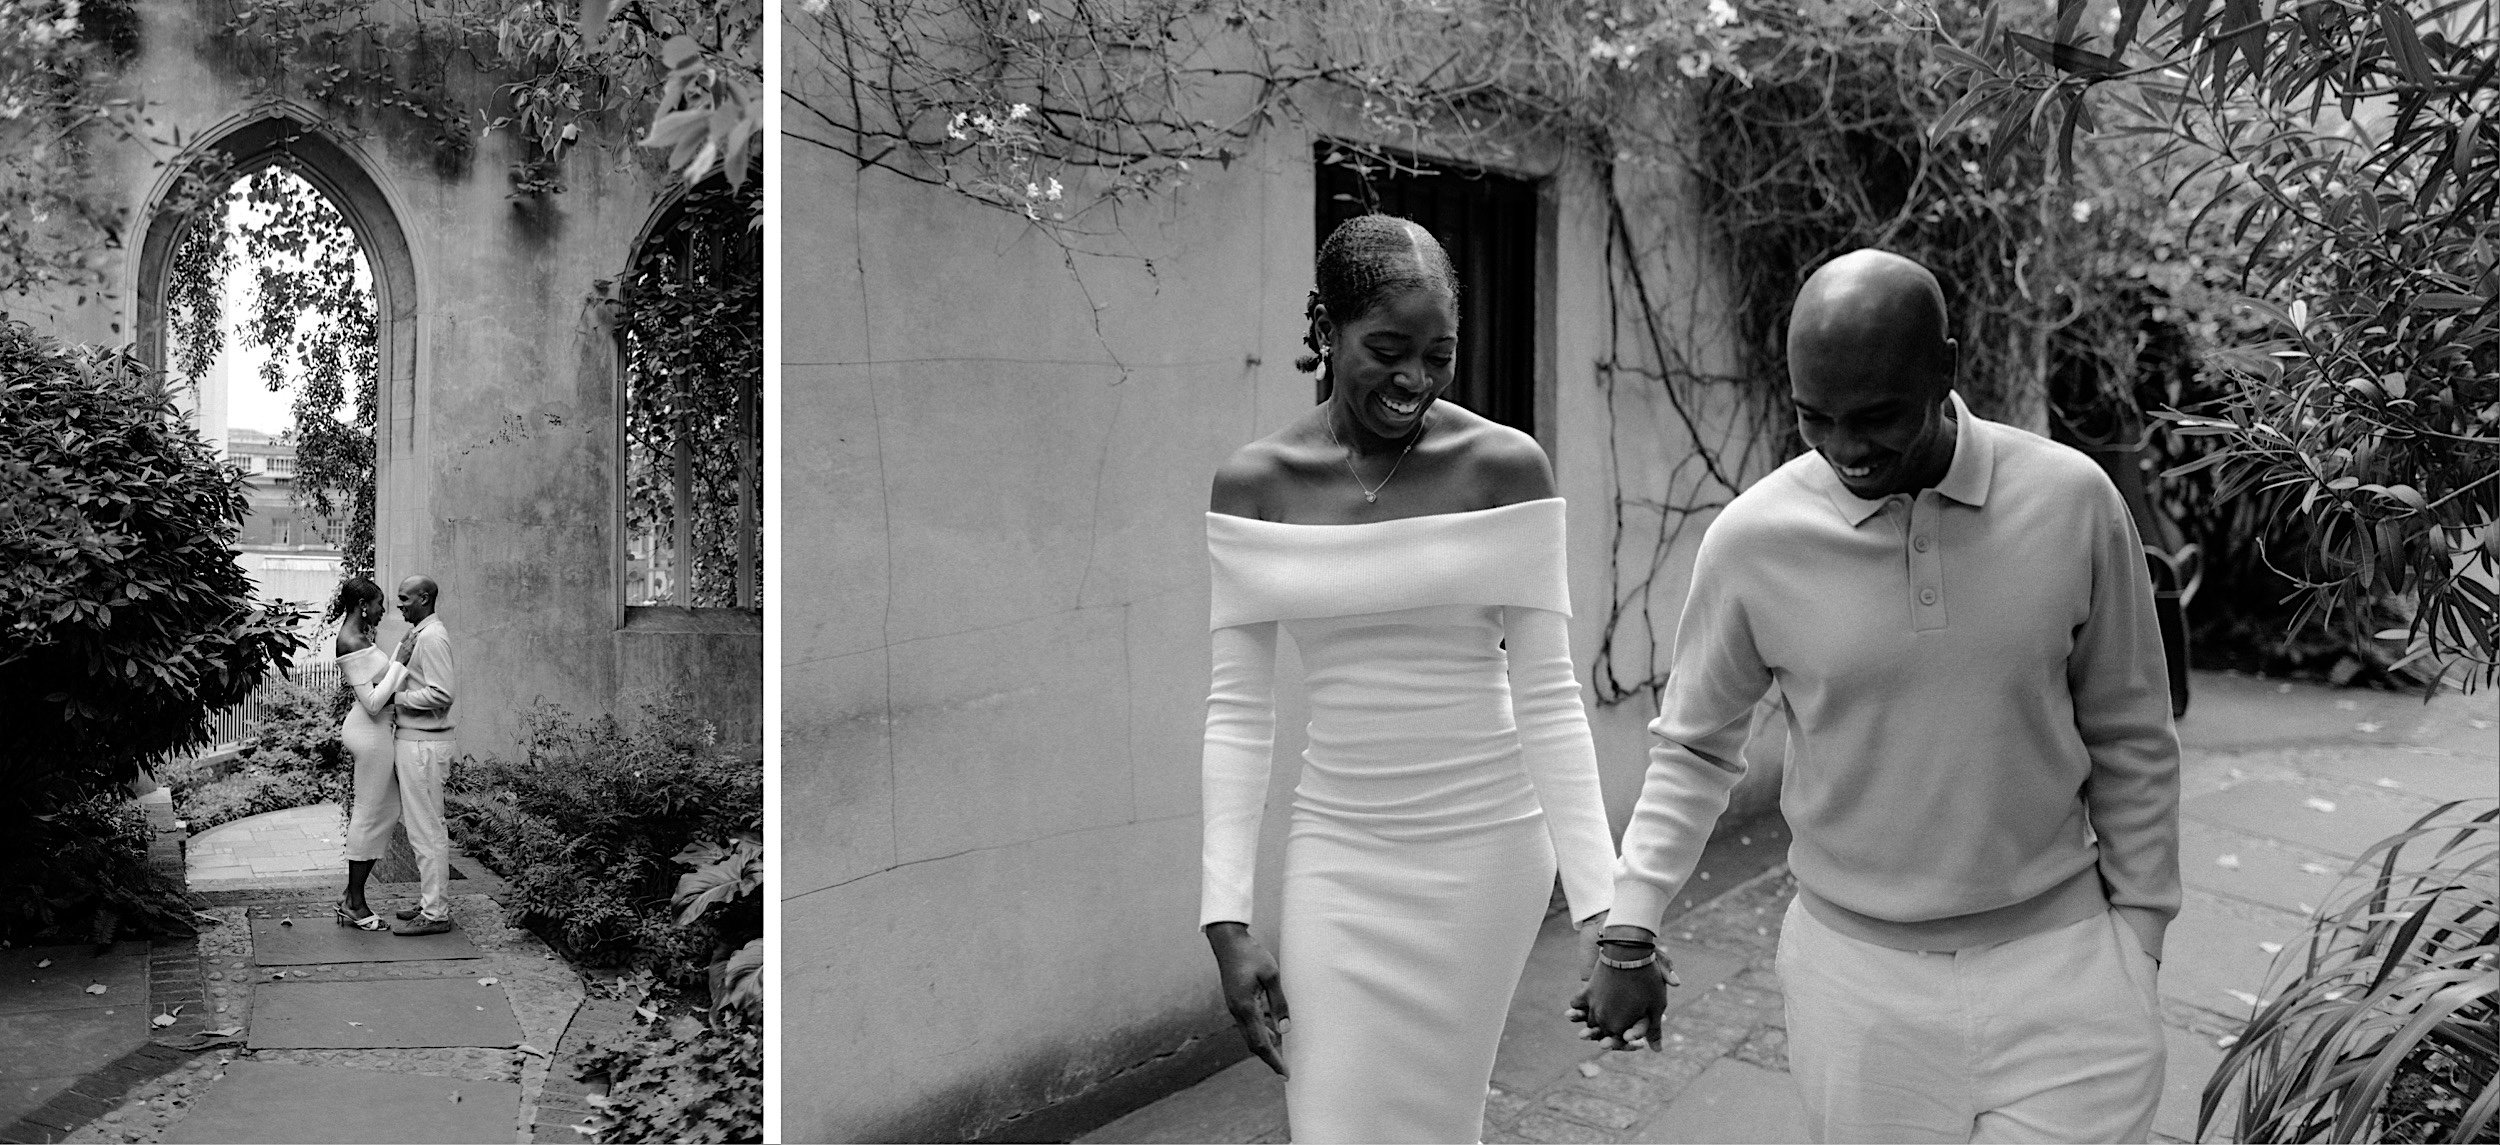 04_St-Dunstans-in-the-east-pre-wedding-shoot0004_St-Dunstans-in-the-east-pre-wedding-shoot0008_Gorgeous black model couple in love share intimate moment in st dunstan in the east_Gorgeous black model couple in love walk through st dunstan in the east.jpg